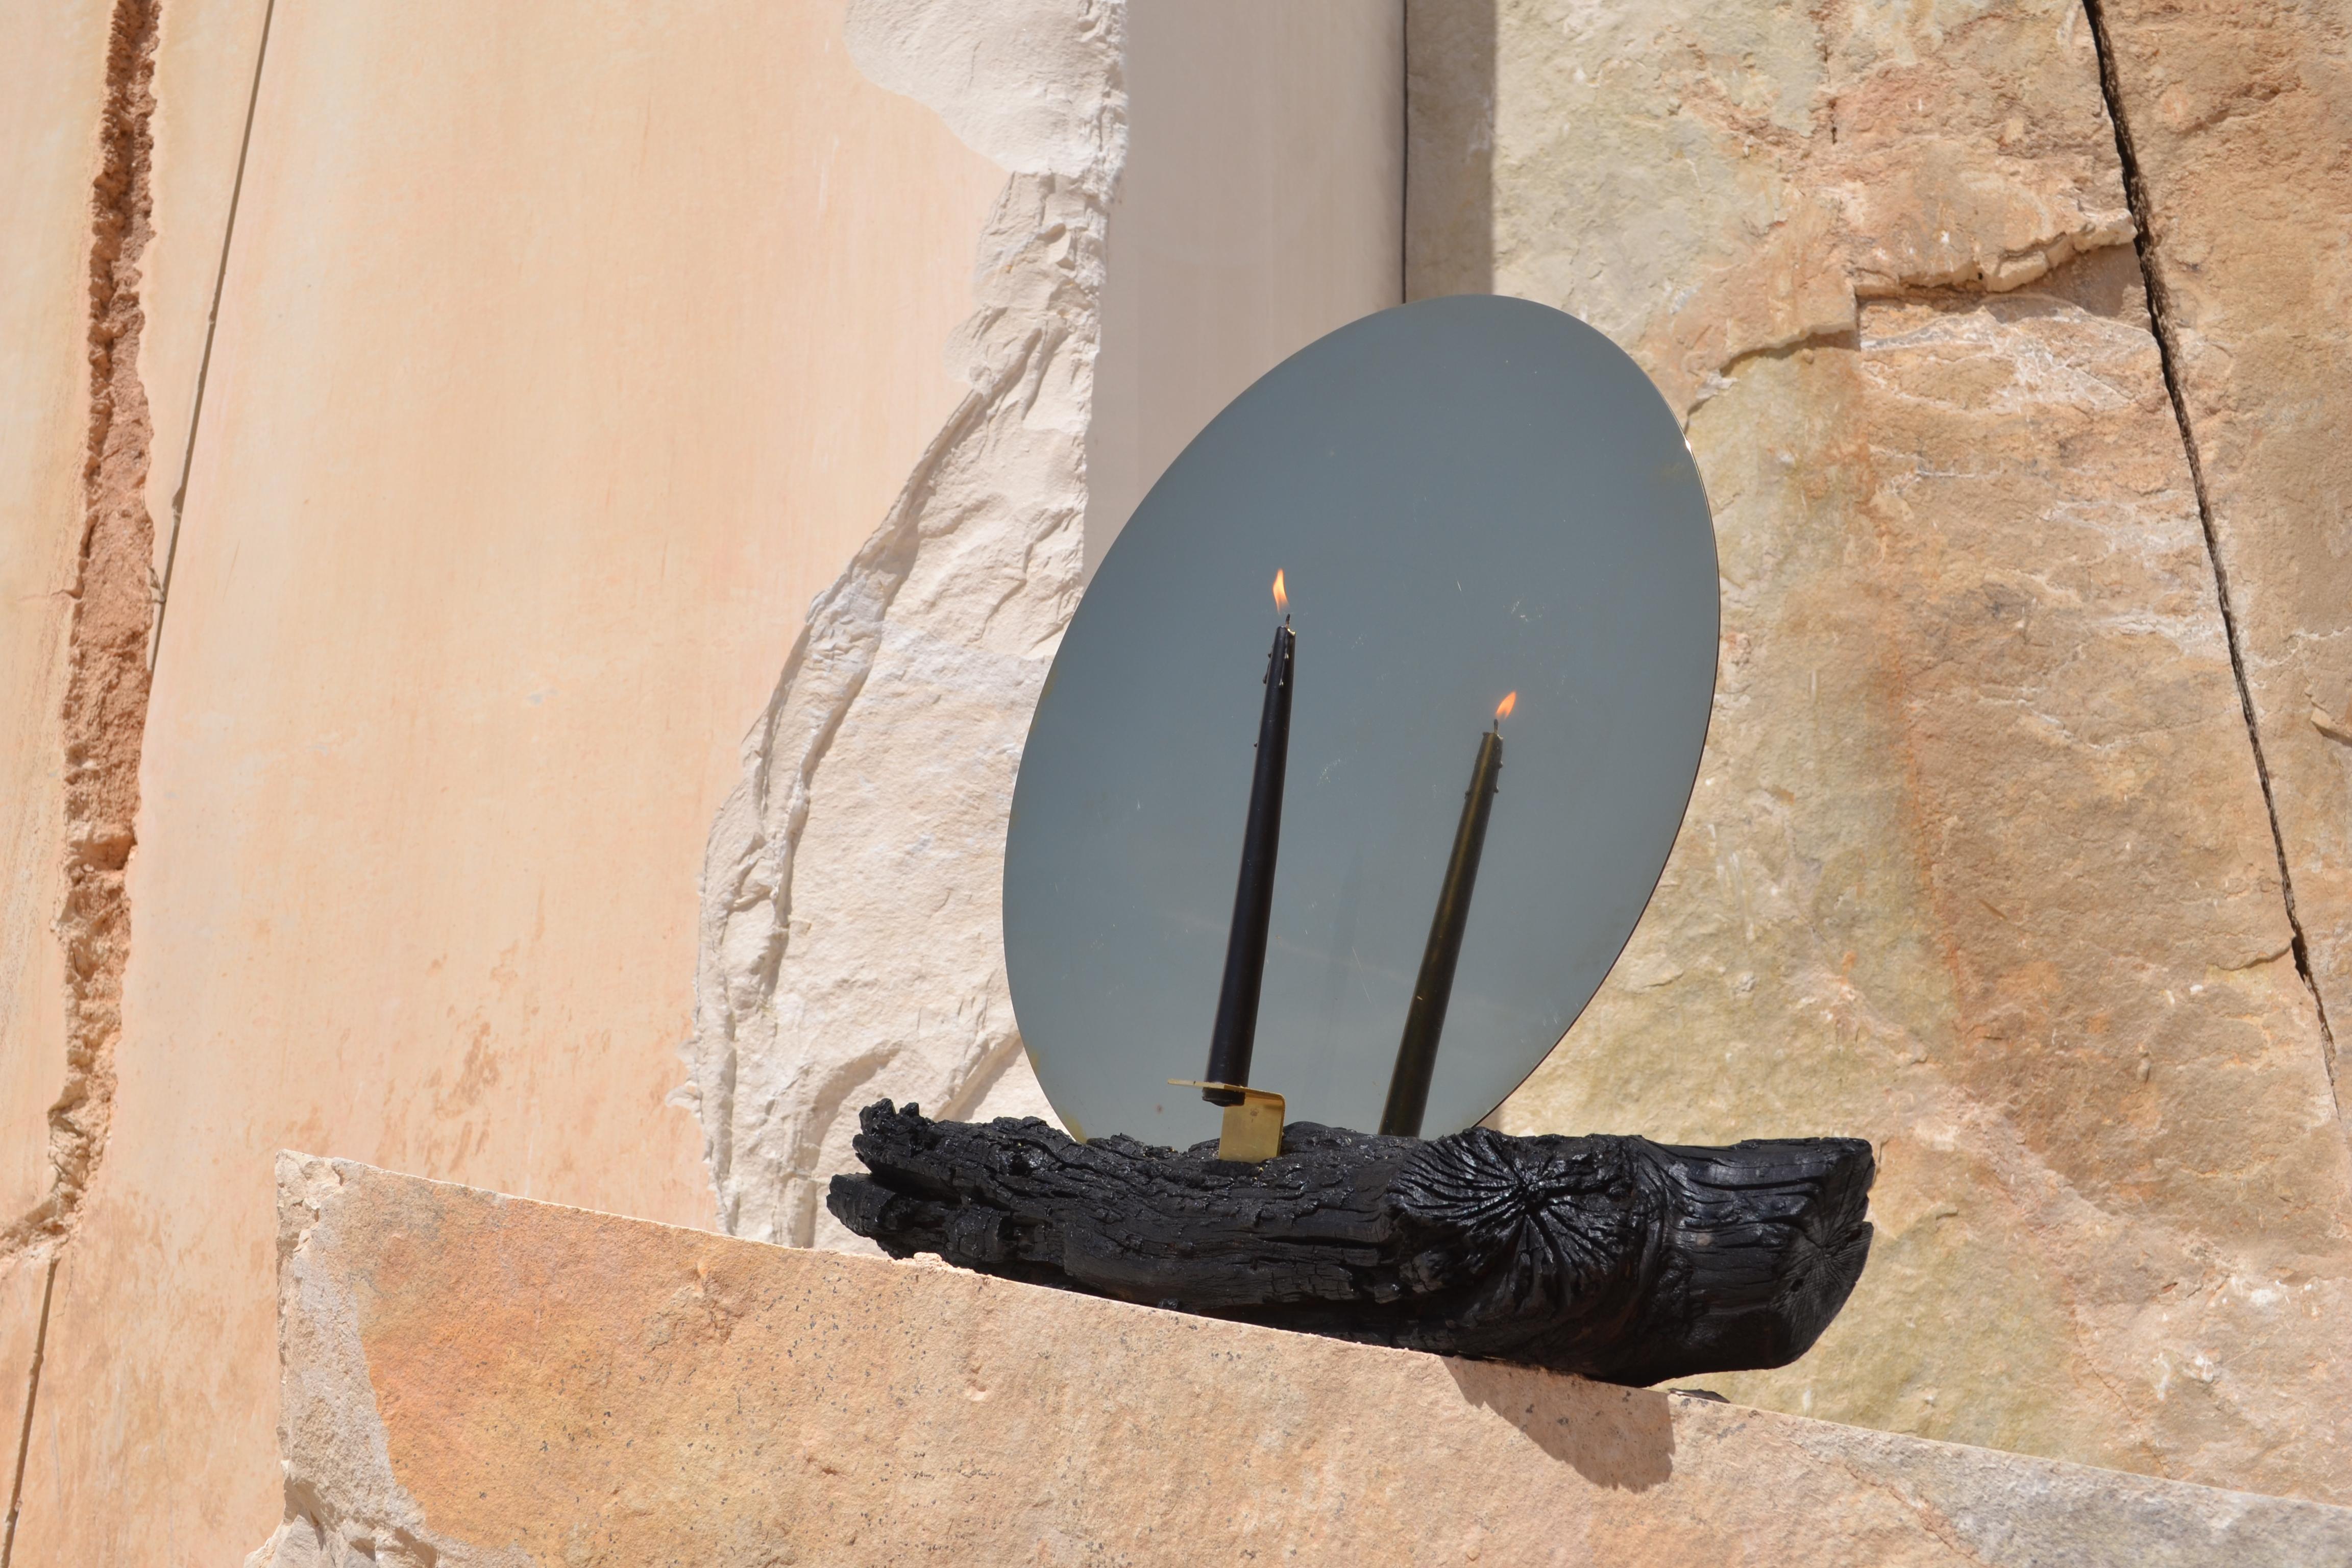 Brass mirror candle holder by Dessislava Madanska
Onedesignspace
Title: Fire for Contemplation
Object: Mirror, Candle Holder
Year: 2021
Materials: burned wood and mirror polished brass
Size: 14 x 62 x 56 cm
Limited Edition of 12+2 A.P.

Dessislava